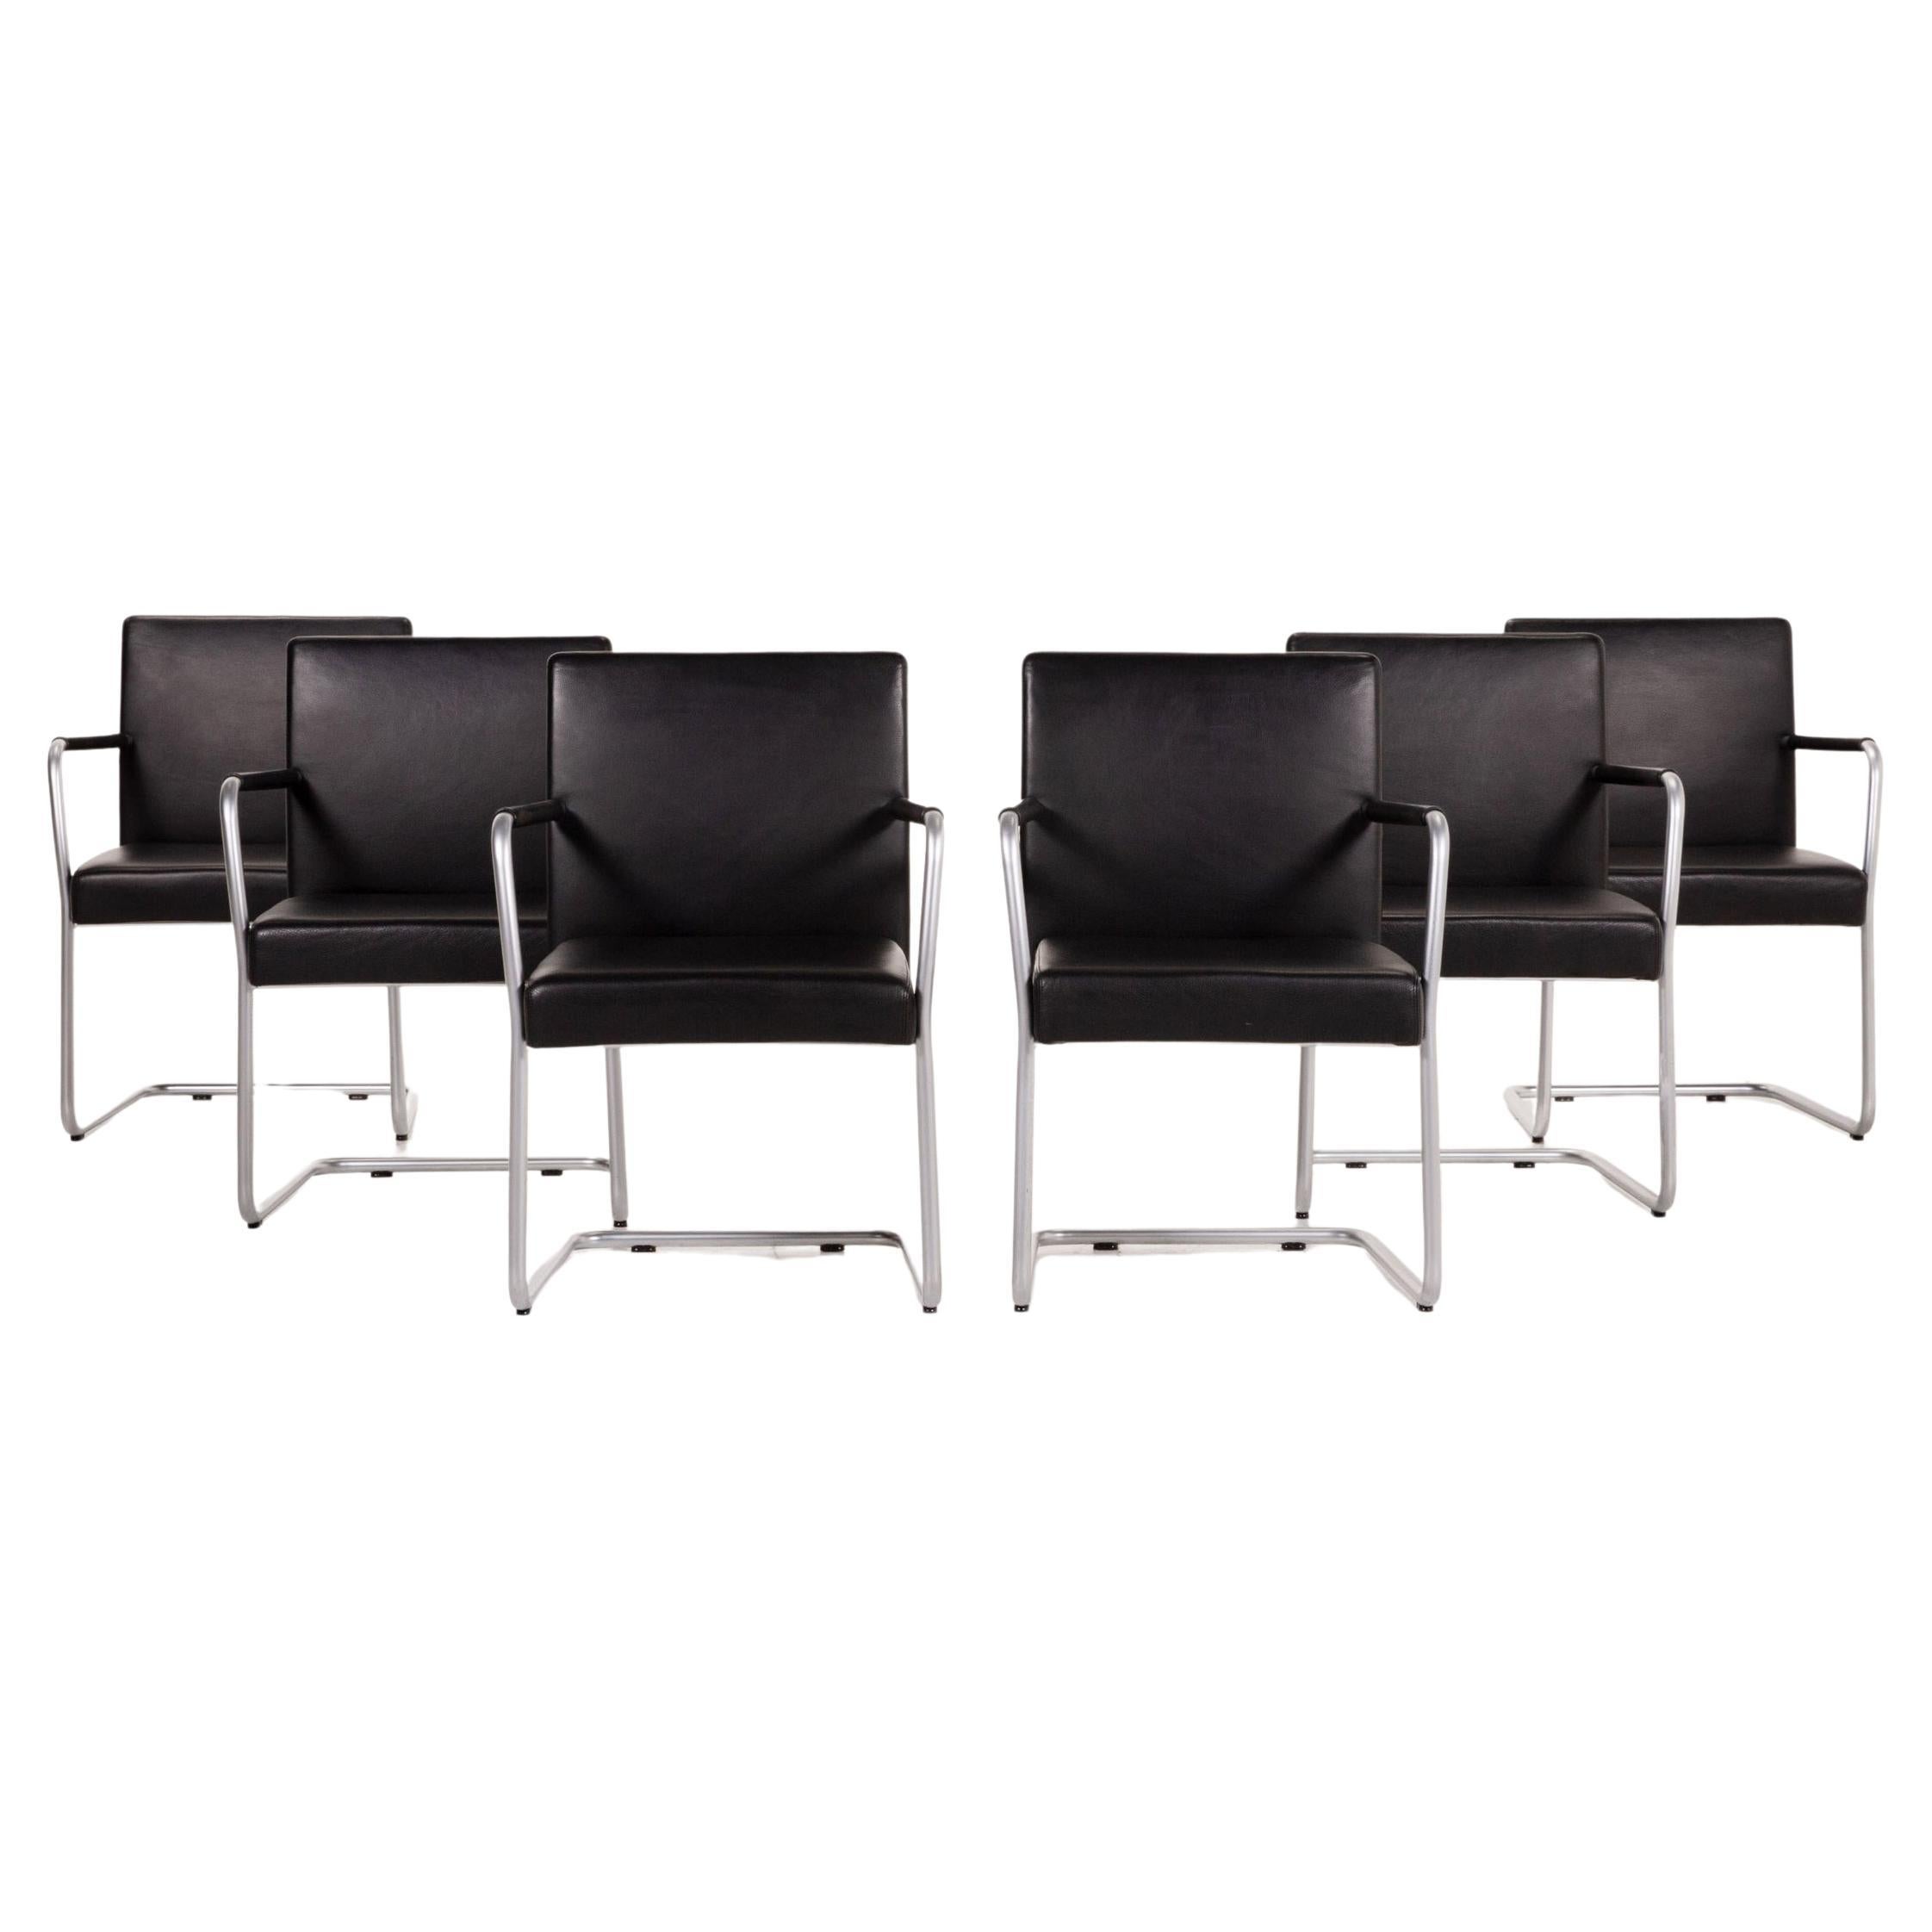 Walter Knoll Jason 1519 Leather Chair Set Black 6x Cantilever Chairs For Sale